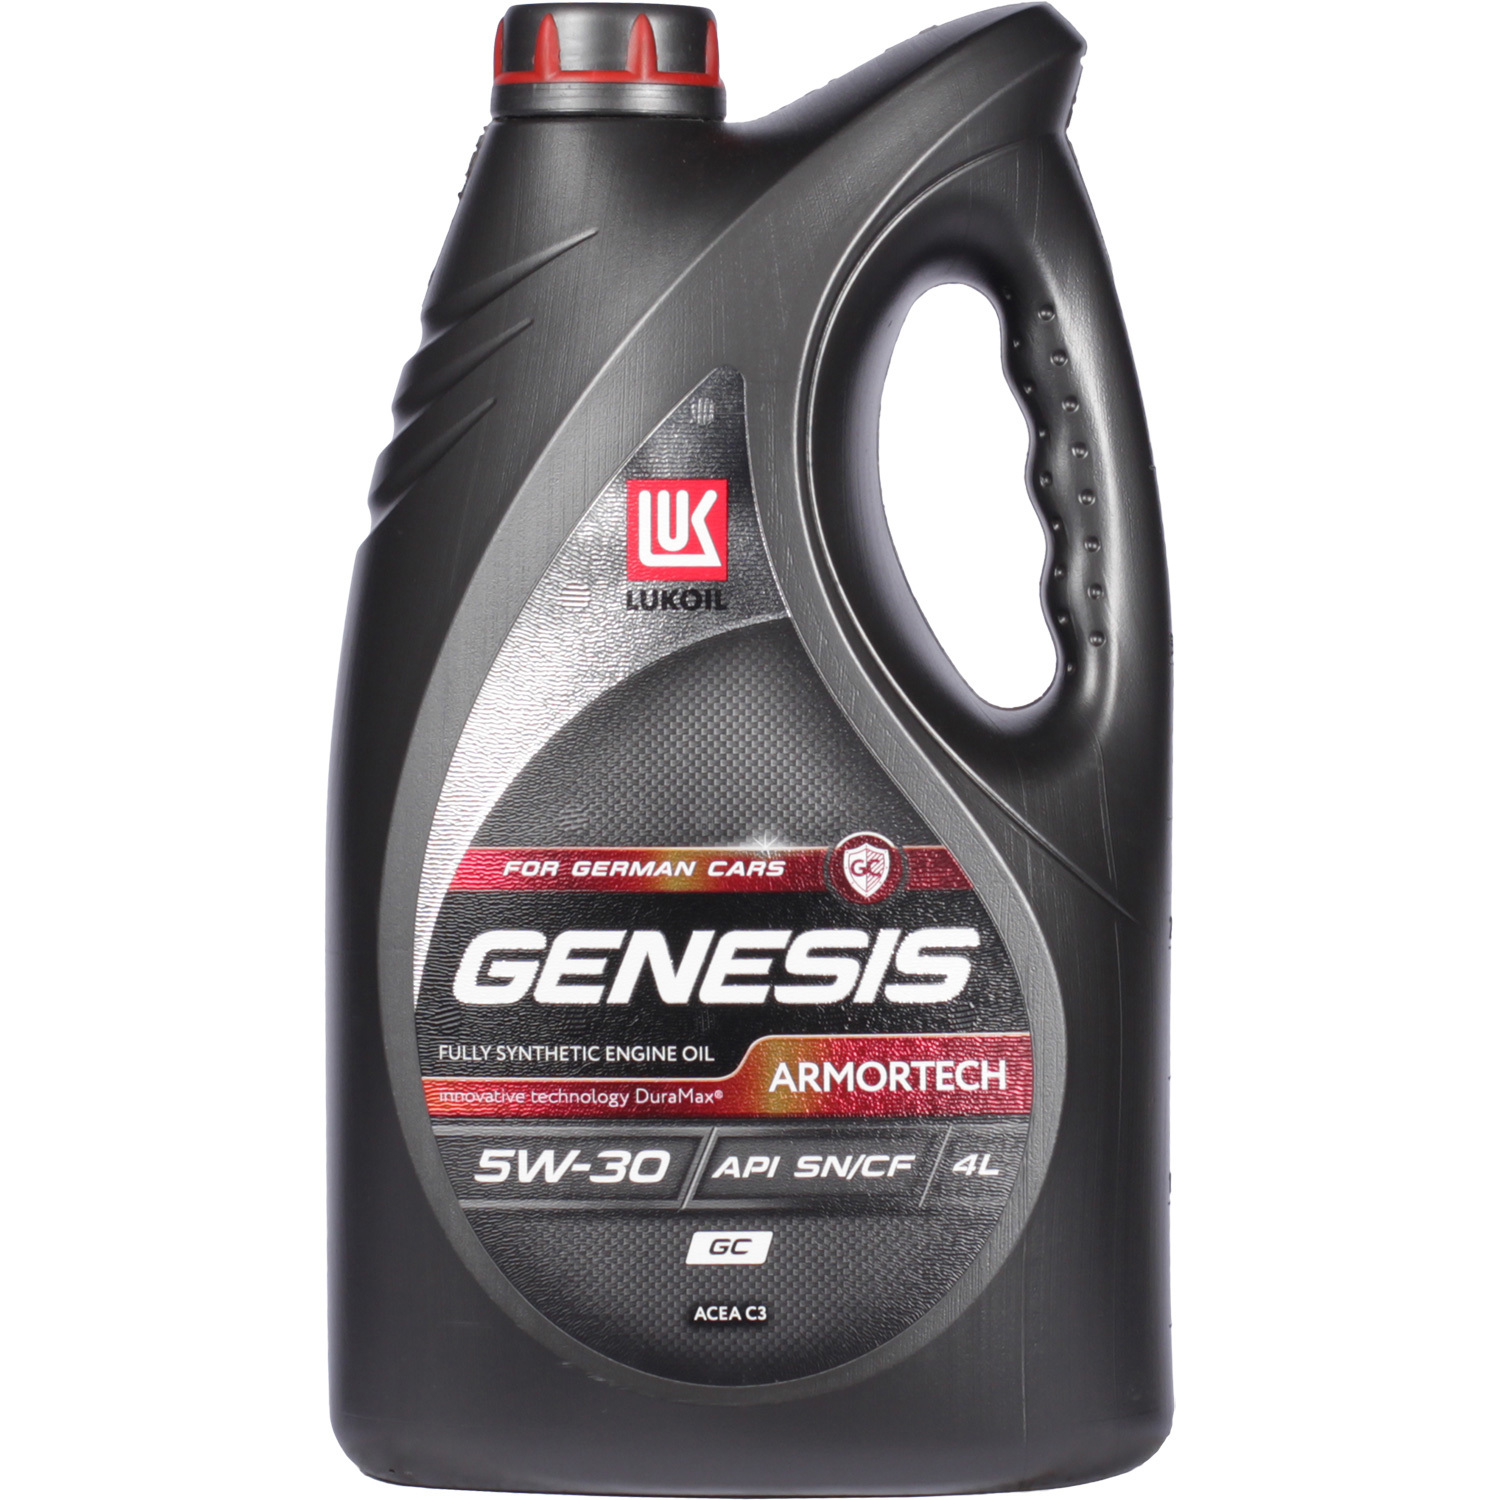 Lukoil Моторное масло Lukoil Genesis Armortech GC 5W-30, 4 л lukoil моторное масло lukoil genesis armortech hk 5w 30 1 л